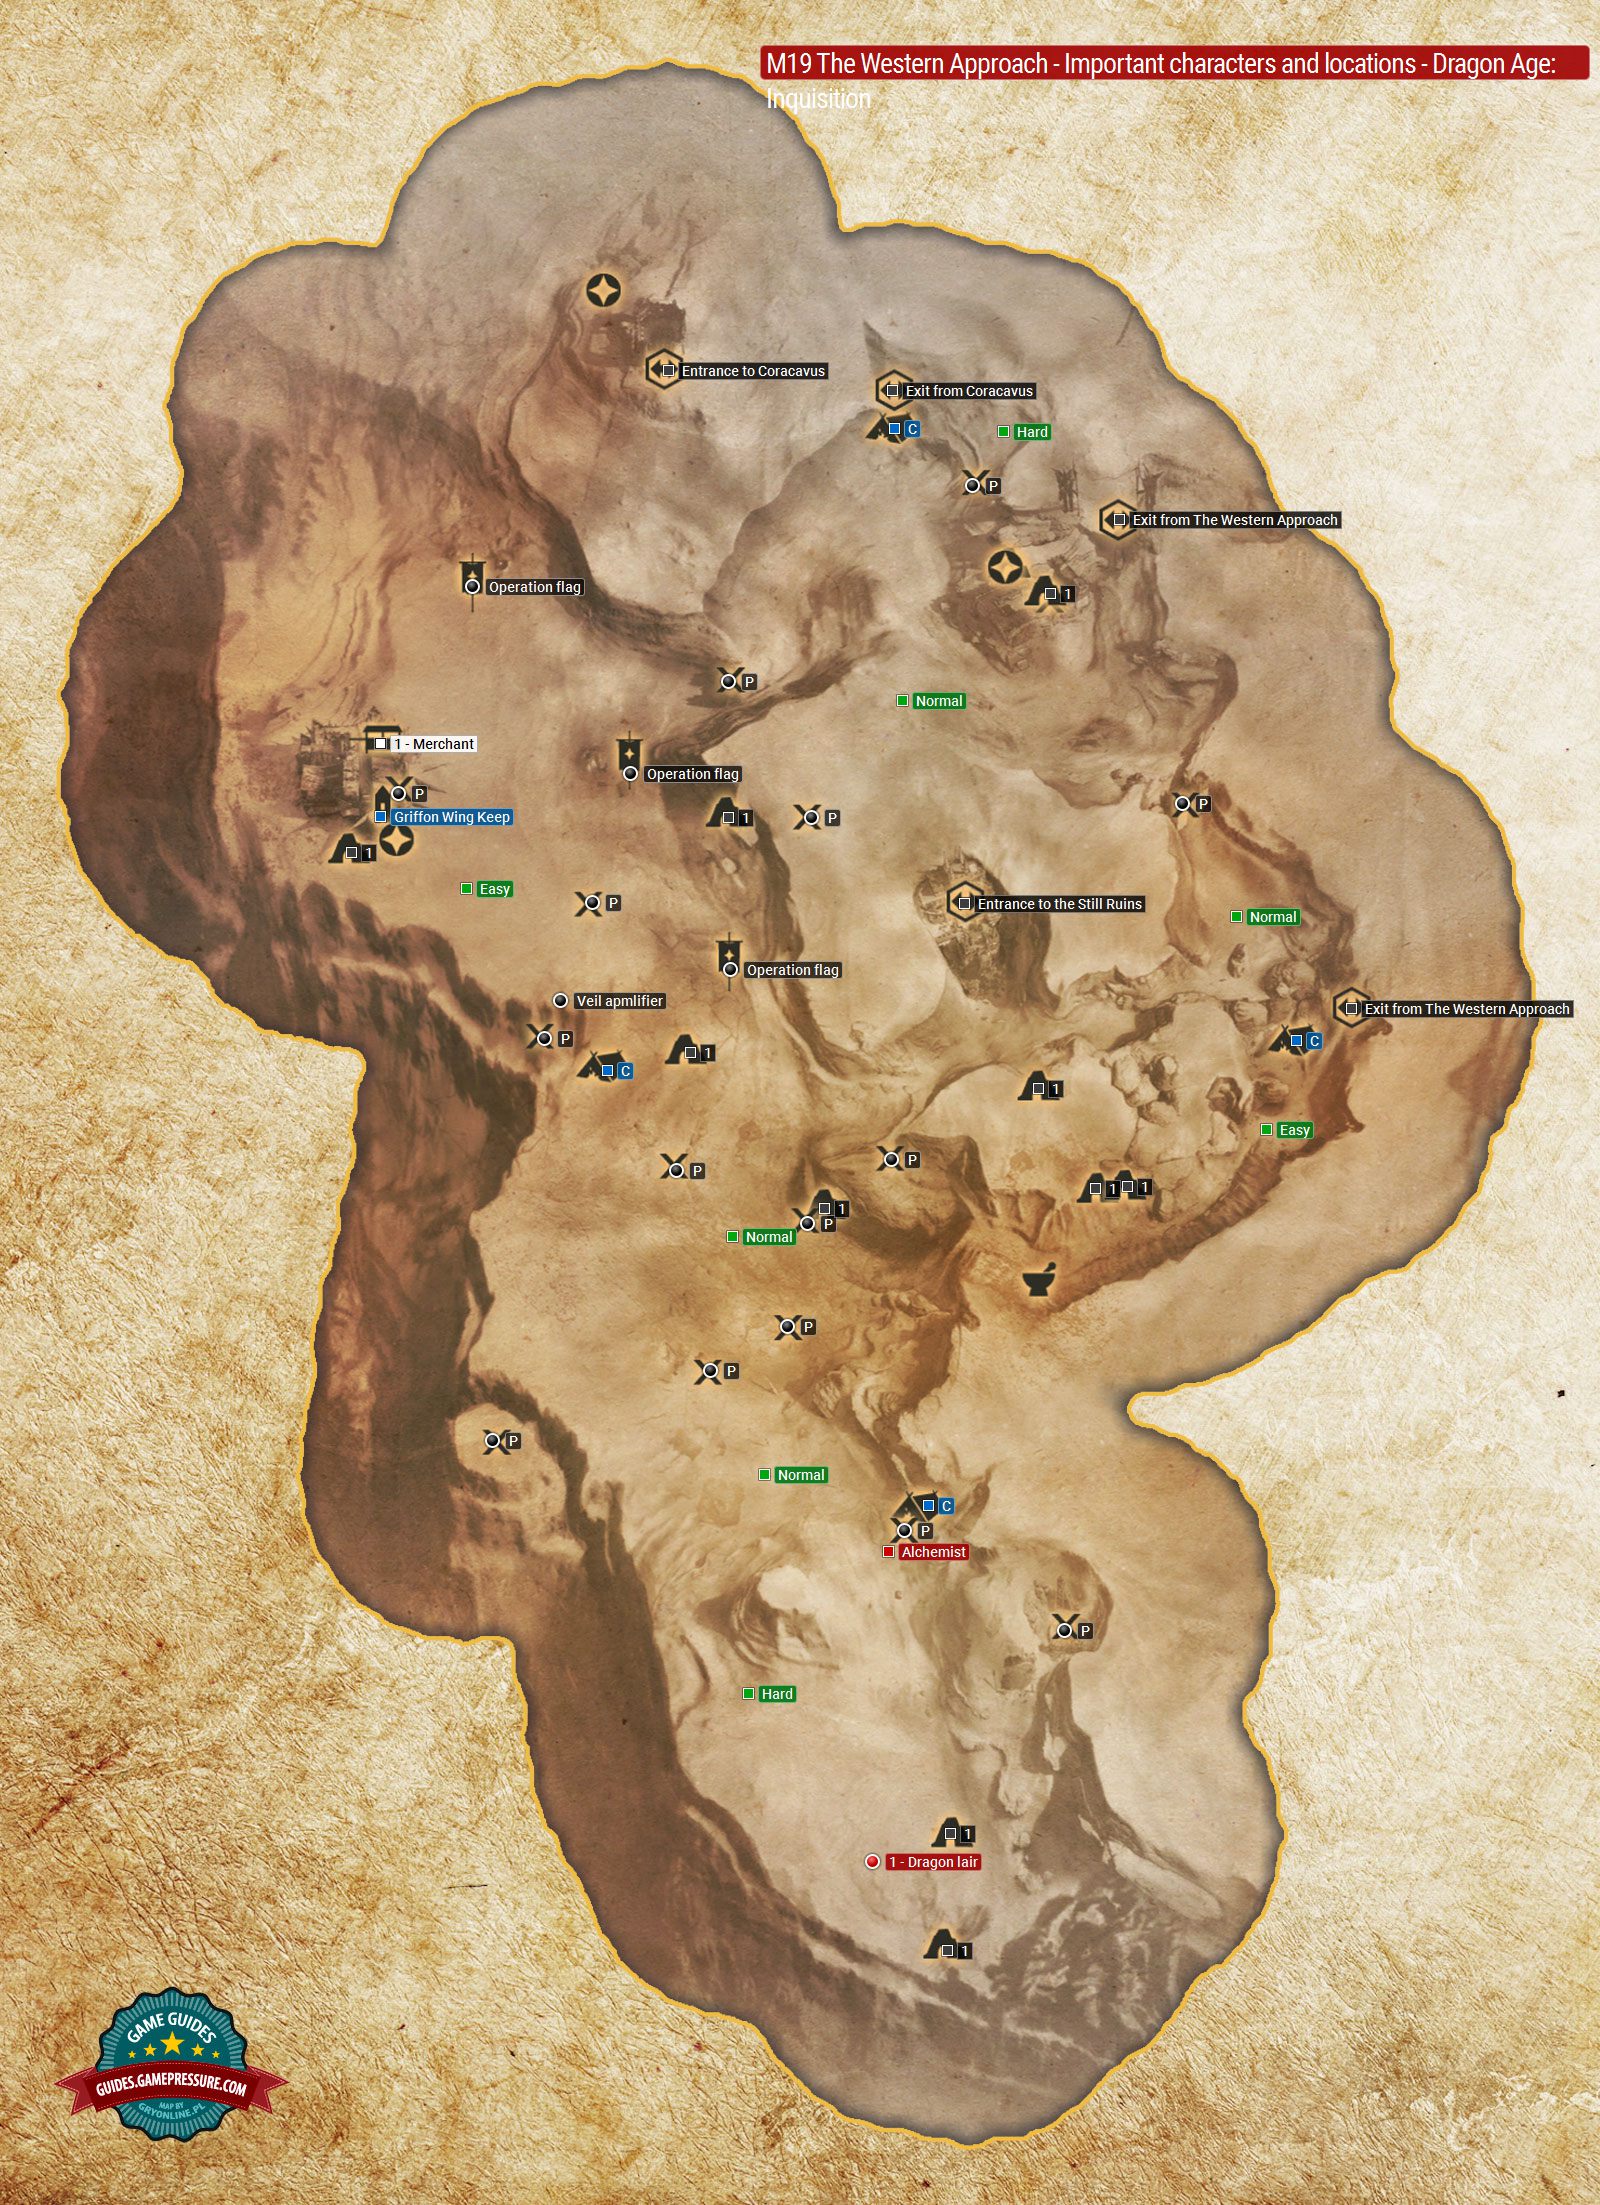 M19 The Western Approach - Important characters and locations - Dragon Age: Inquisition